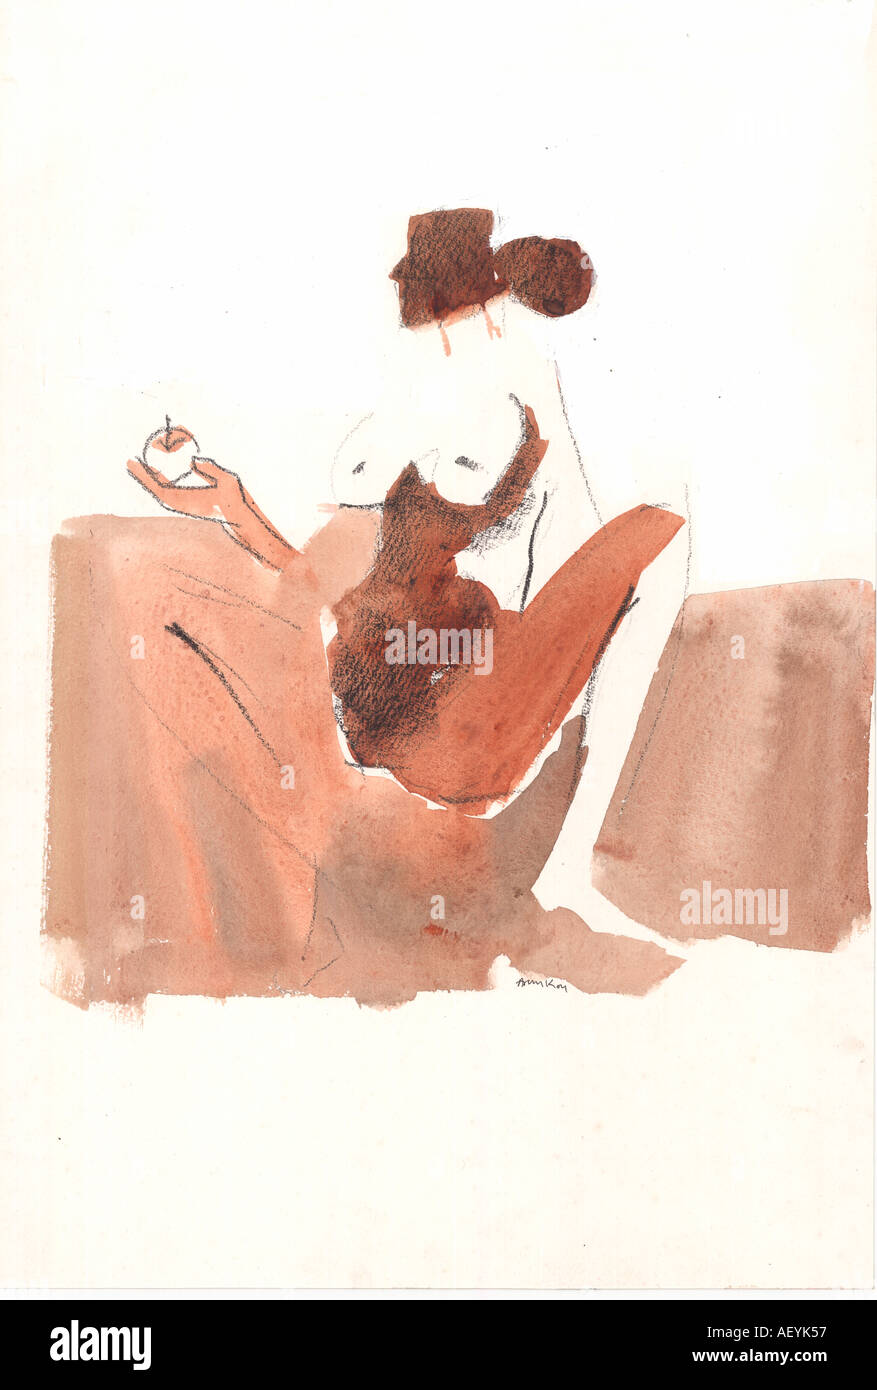 Painting acrylic color on paper Kama Sutra Series Lovers in an Intimate pose Stock Photo